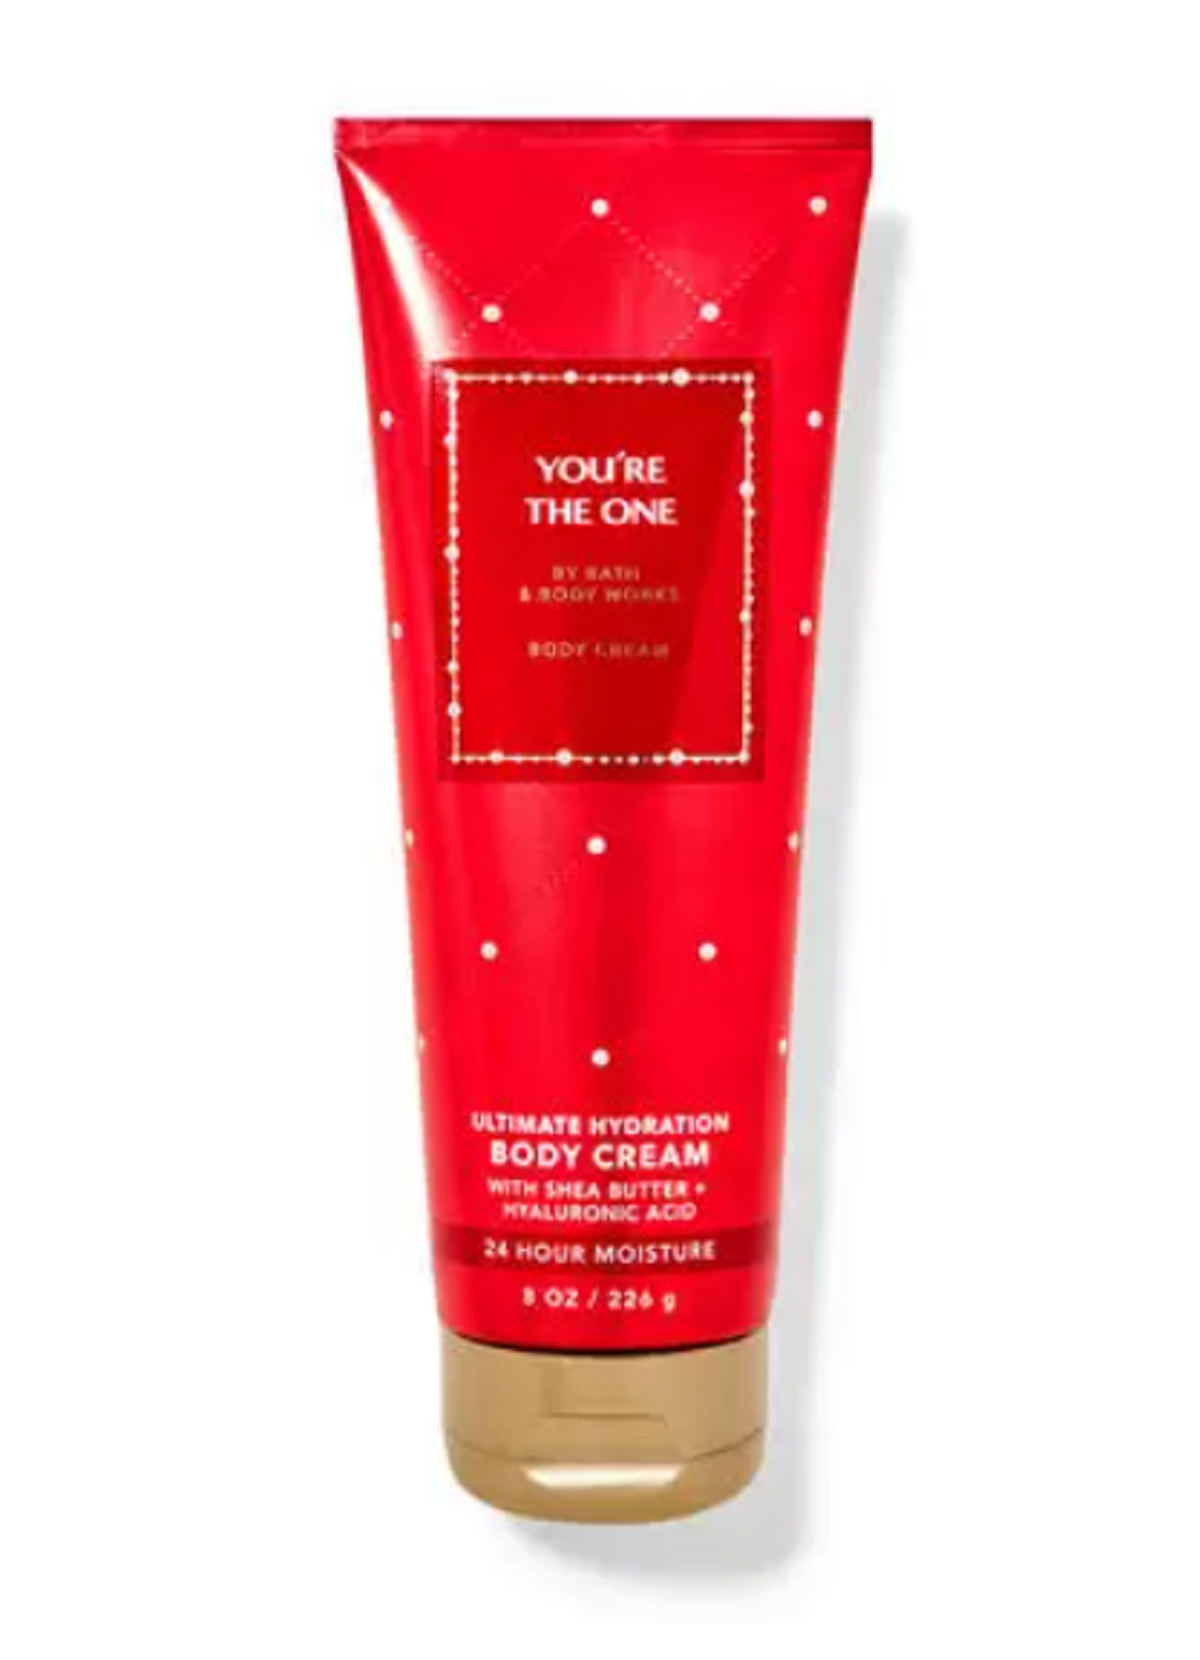 You're The One Ultimate Hydration Body Cream, Valentine’s Day gift ideas, valentinesday